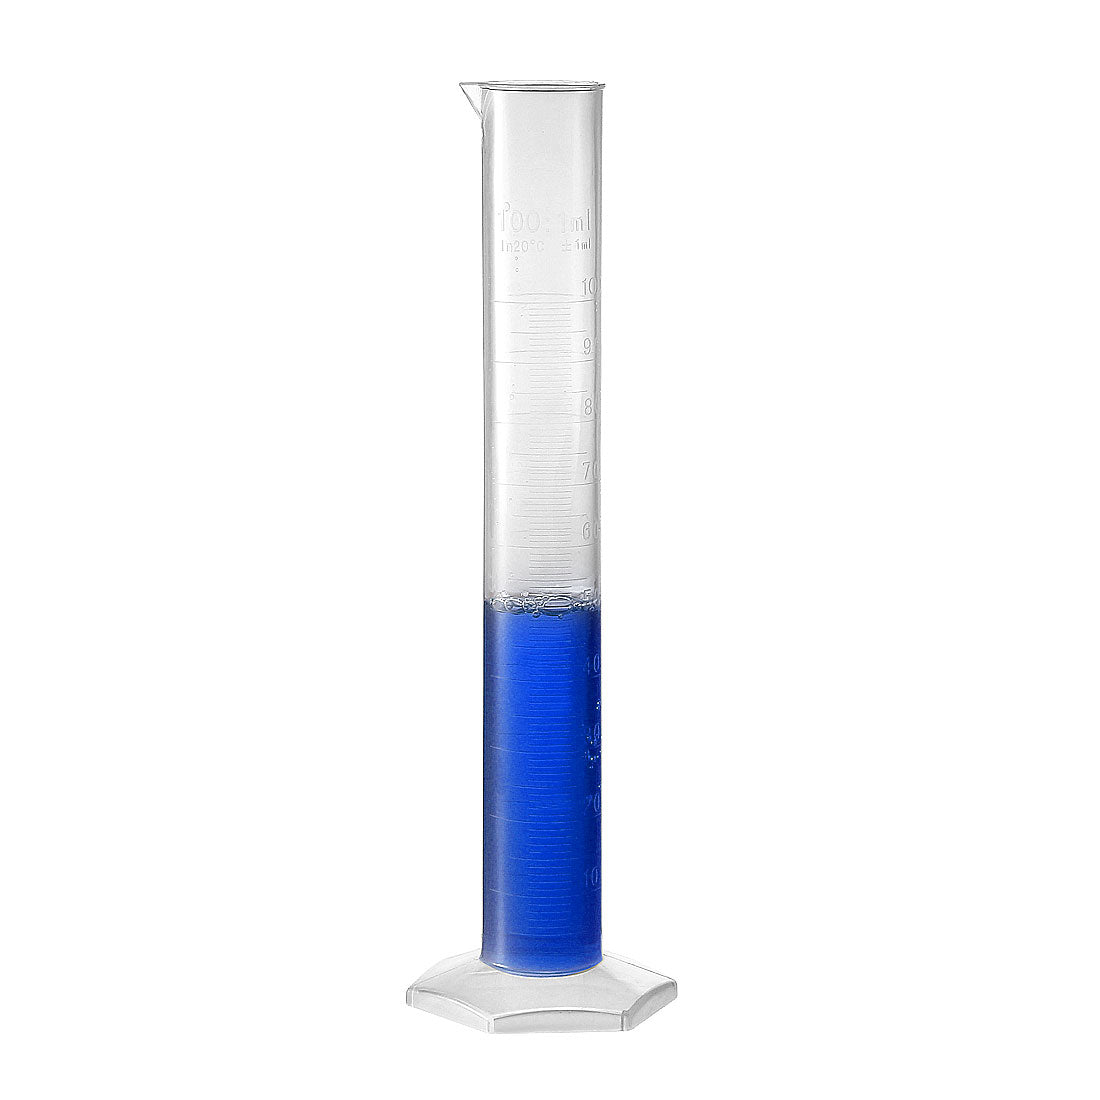 uxcell Uxcell 100ml Laboratory Measurements Clear White Plastic Hex Base Graduated Cylinder for Chemical Measuring 3 Pcs